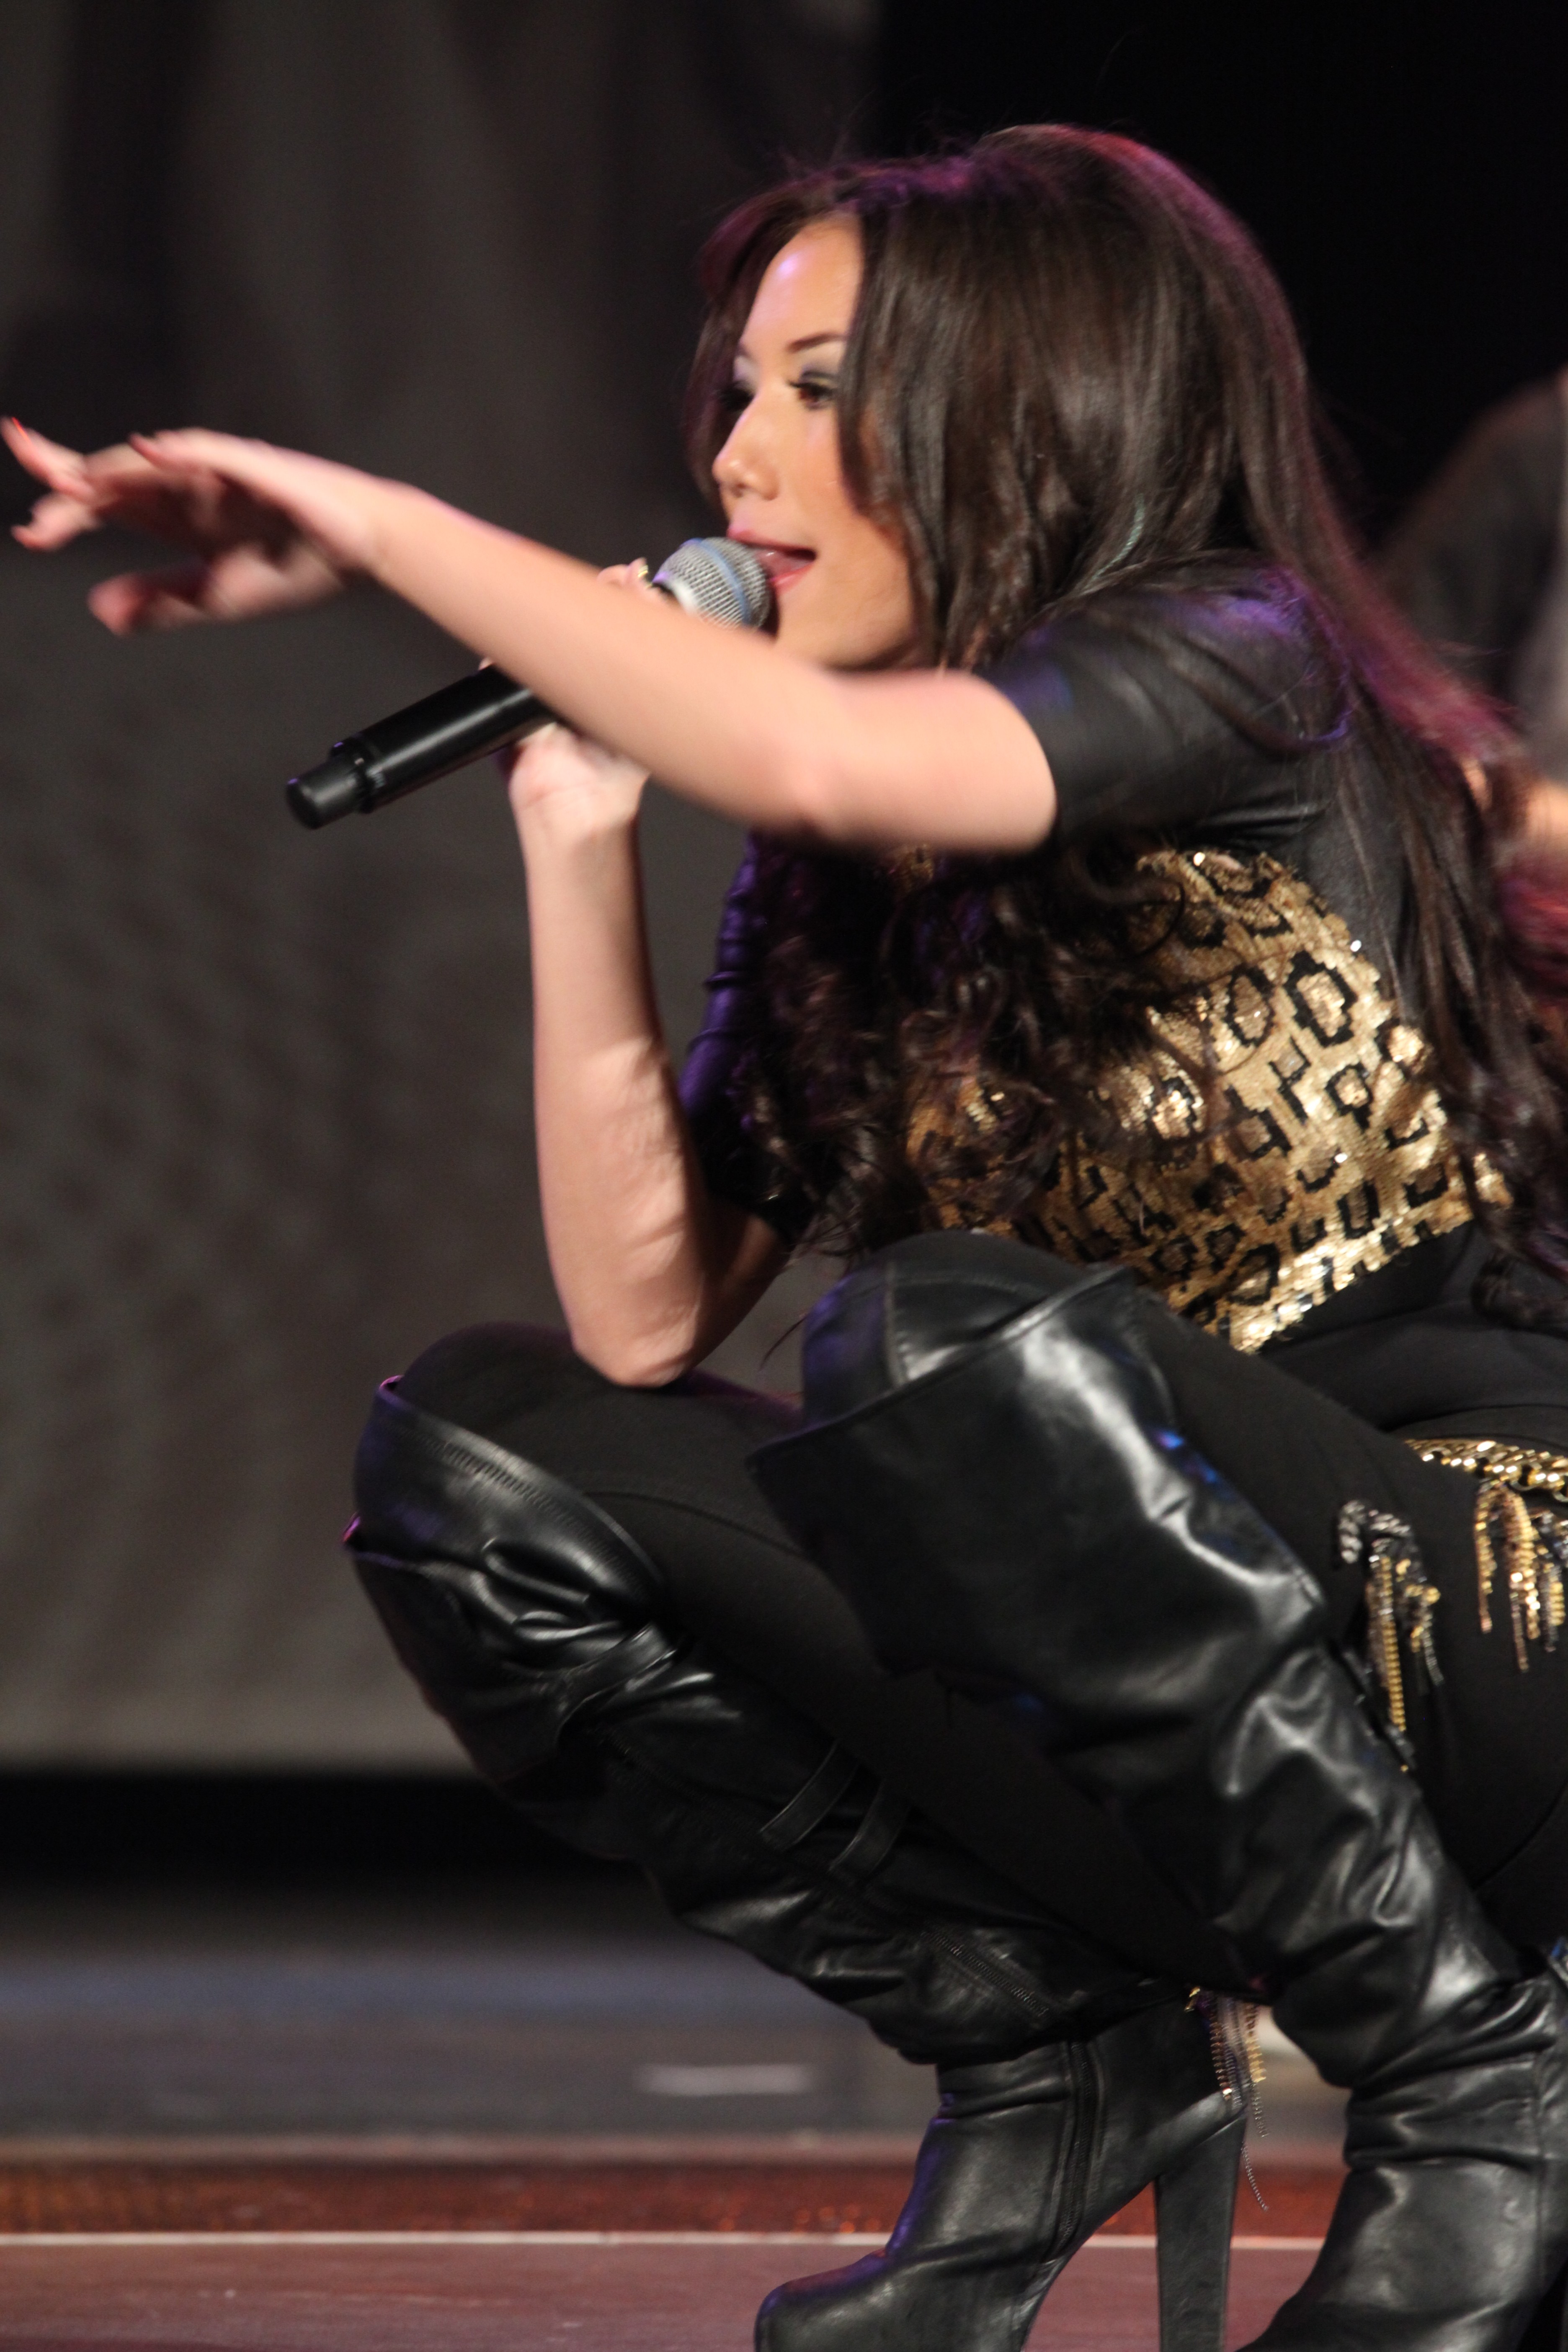 Manika Performing At Palms Pearl Concert Theater on Battle of the Strands TV Show Finale Pics!